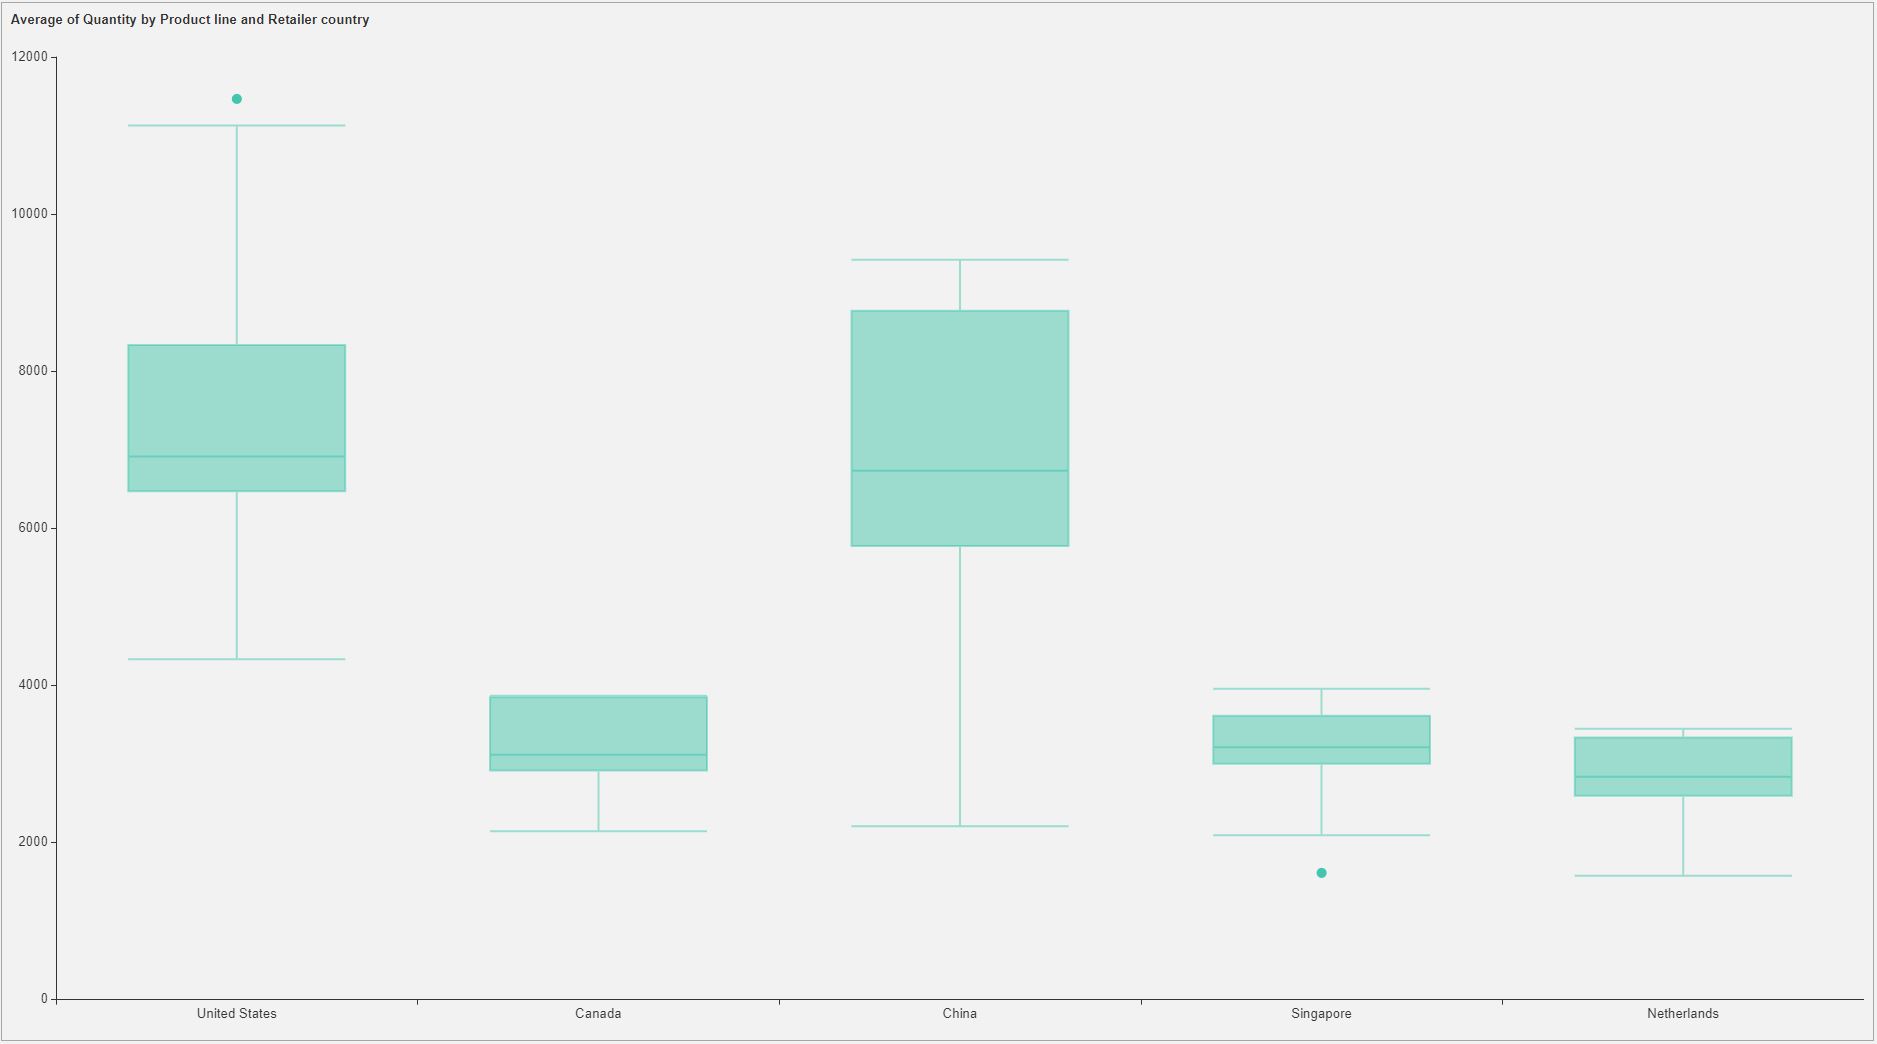 Embedded Business Intelligence Data Visualizations - Box and Whiskers Plot